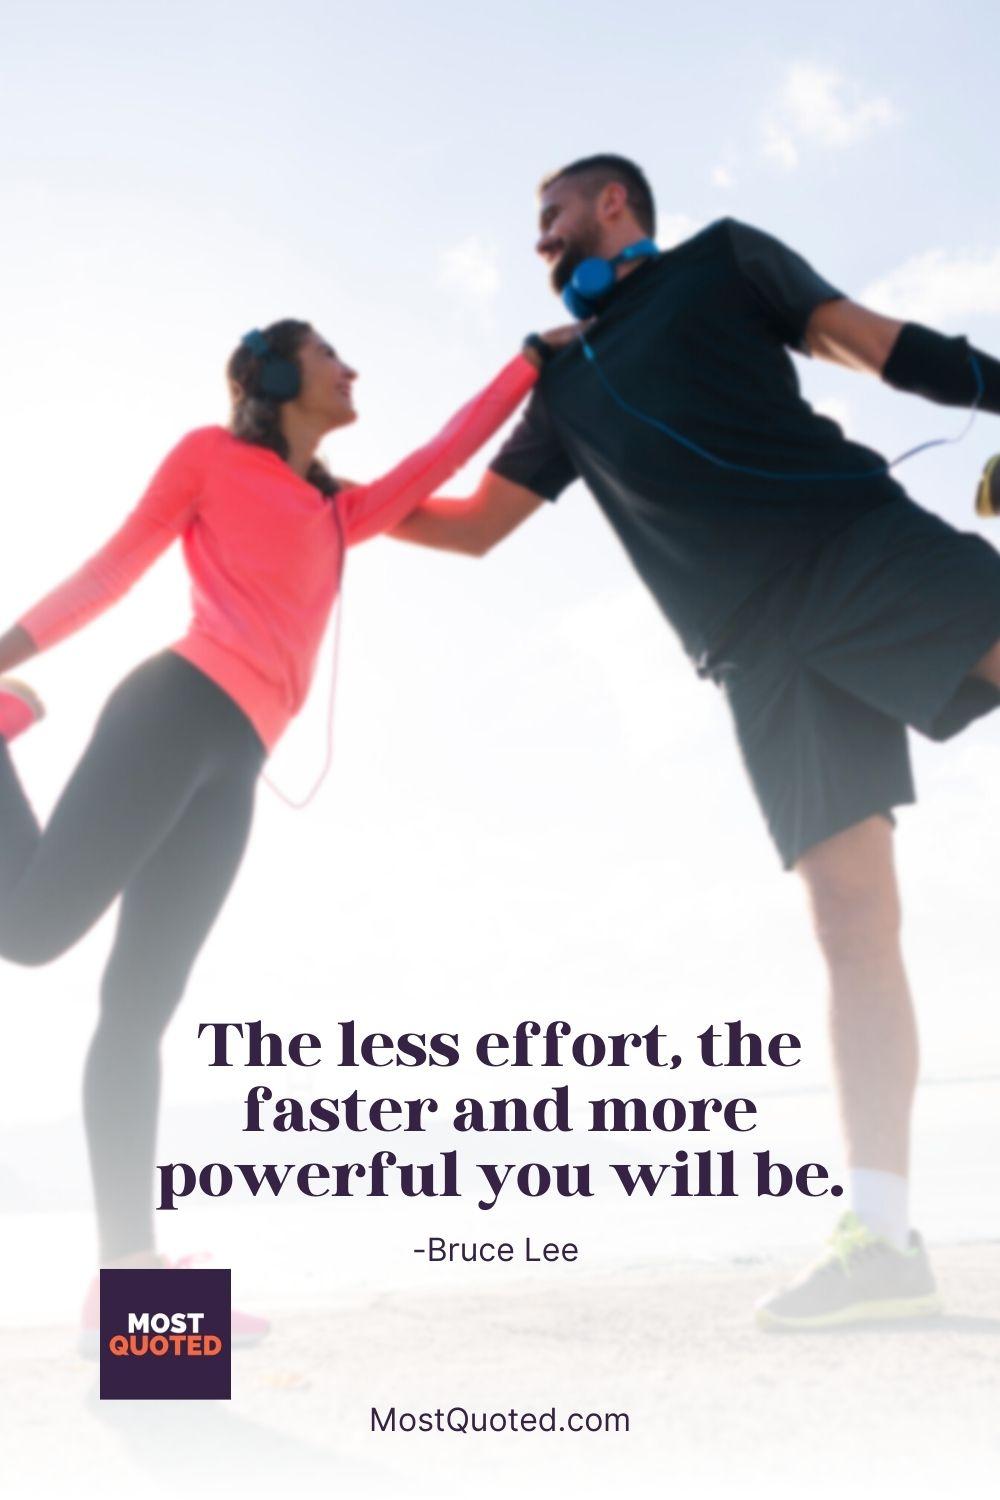 The less effort, the faster and more powerful you will be. - Bruce Lee